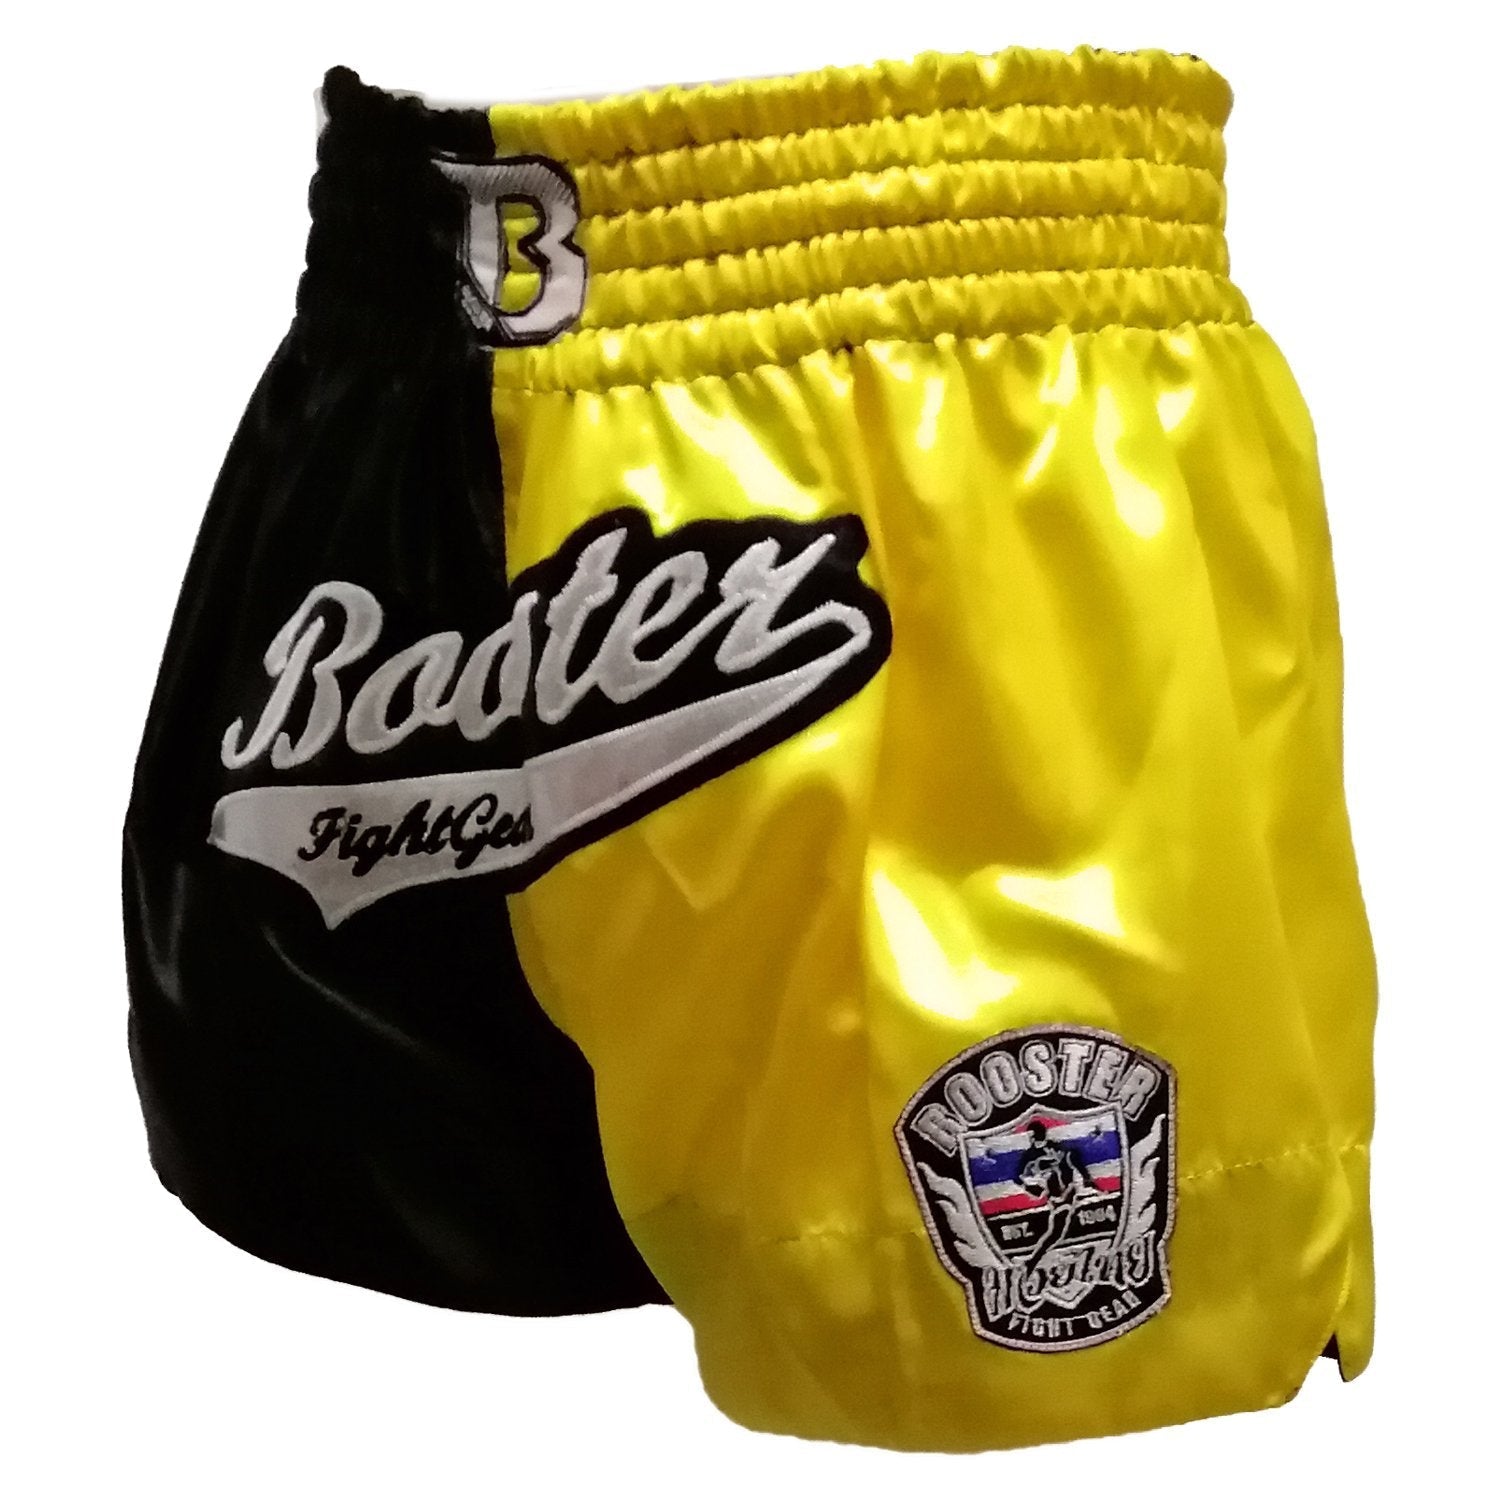 Booster Shorts BS 22 Black Yellow Booster